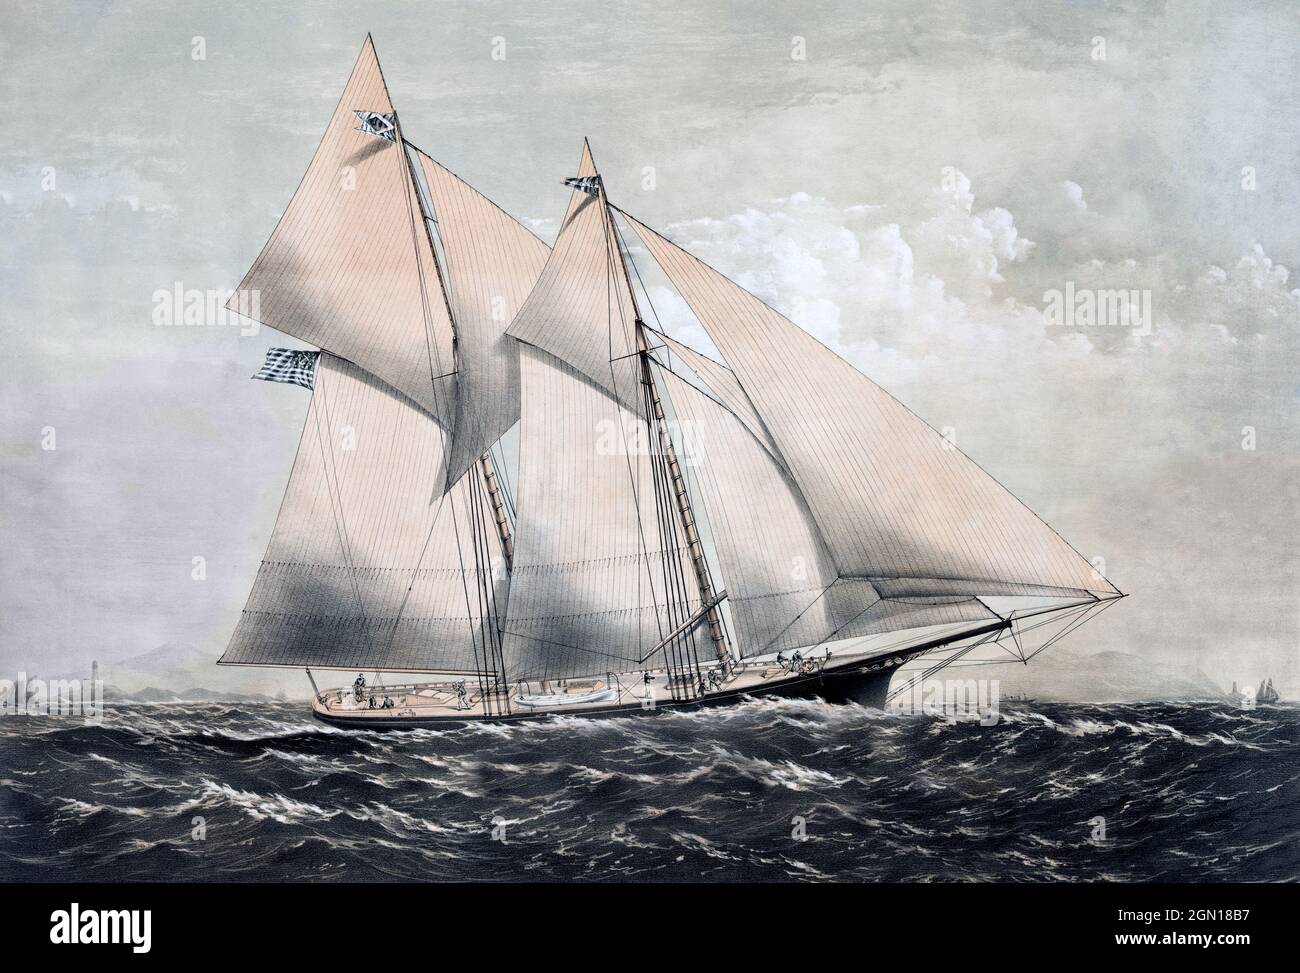 A 19th century sketch of the yacht "Dauntless" created circa 1869 by an anonymous artist for her owner and commander James G Bennett Jnr, vice commodore of the New York Yacht Club. It left New York 28th June 1869 and arrived at Queenstown, in County Cork, Ireland 12.75 days later on July 11th. Pictured off Queenstown, the town was later renamed in 1920 when it became known as Cobh. Stock Photo